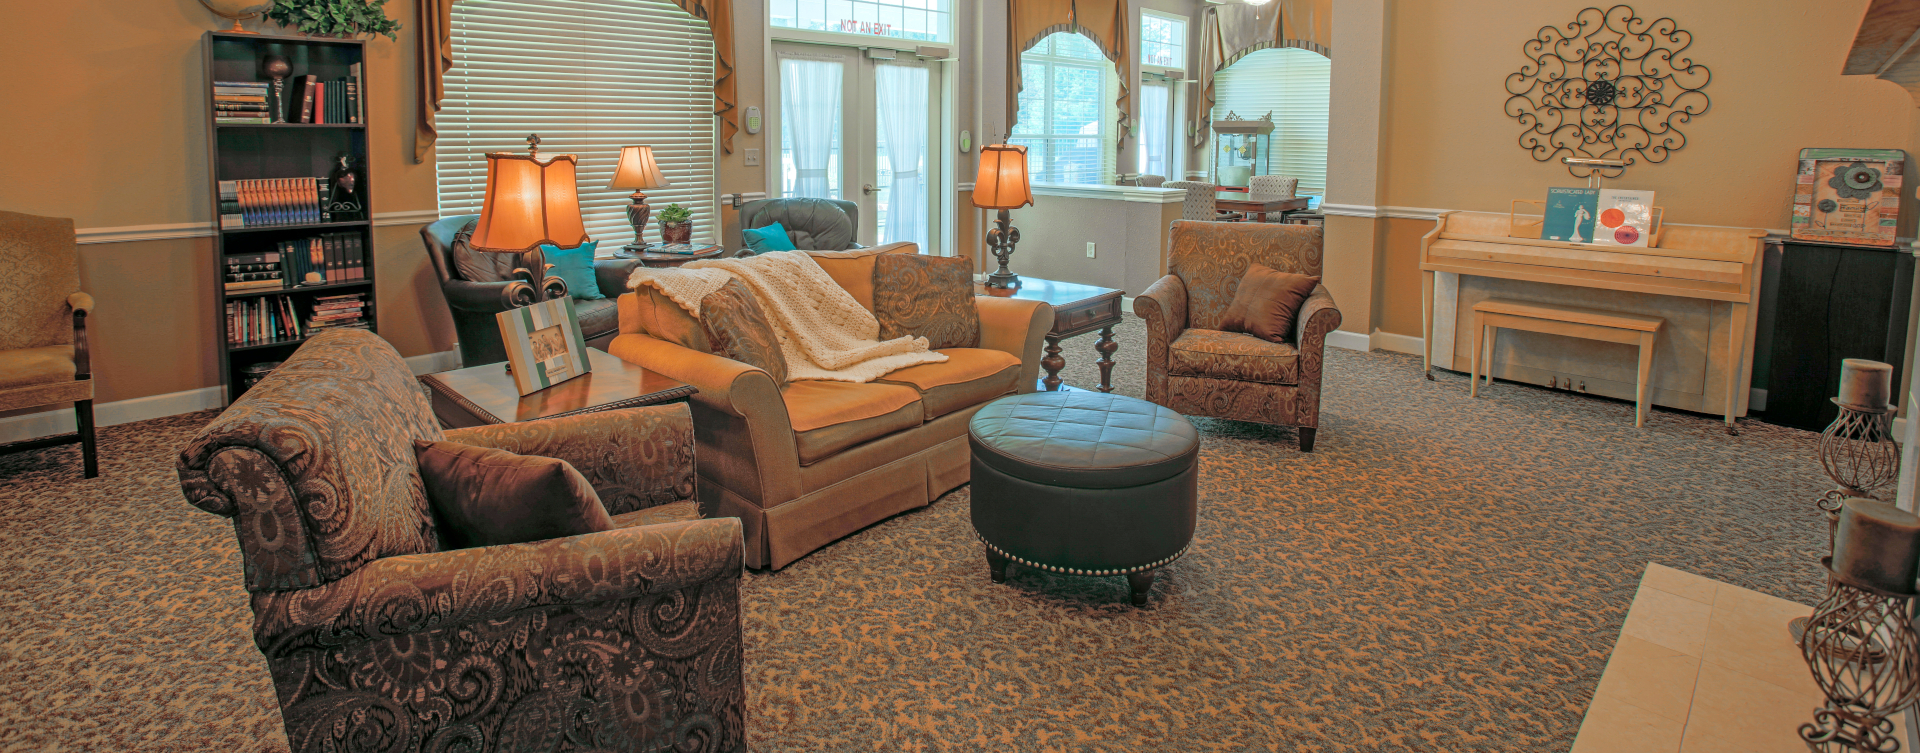 Snooze in your favorite chair in the living room at Bickford of Wabash